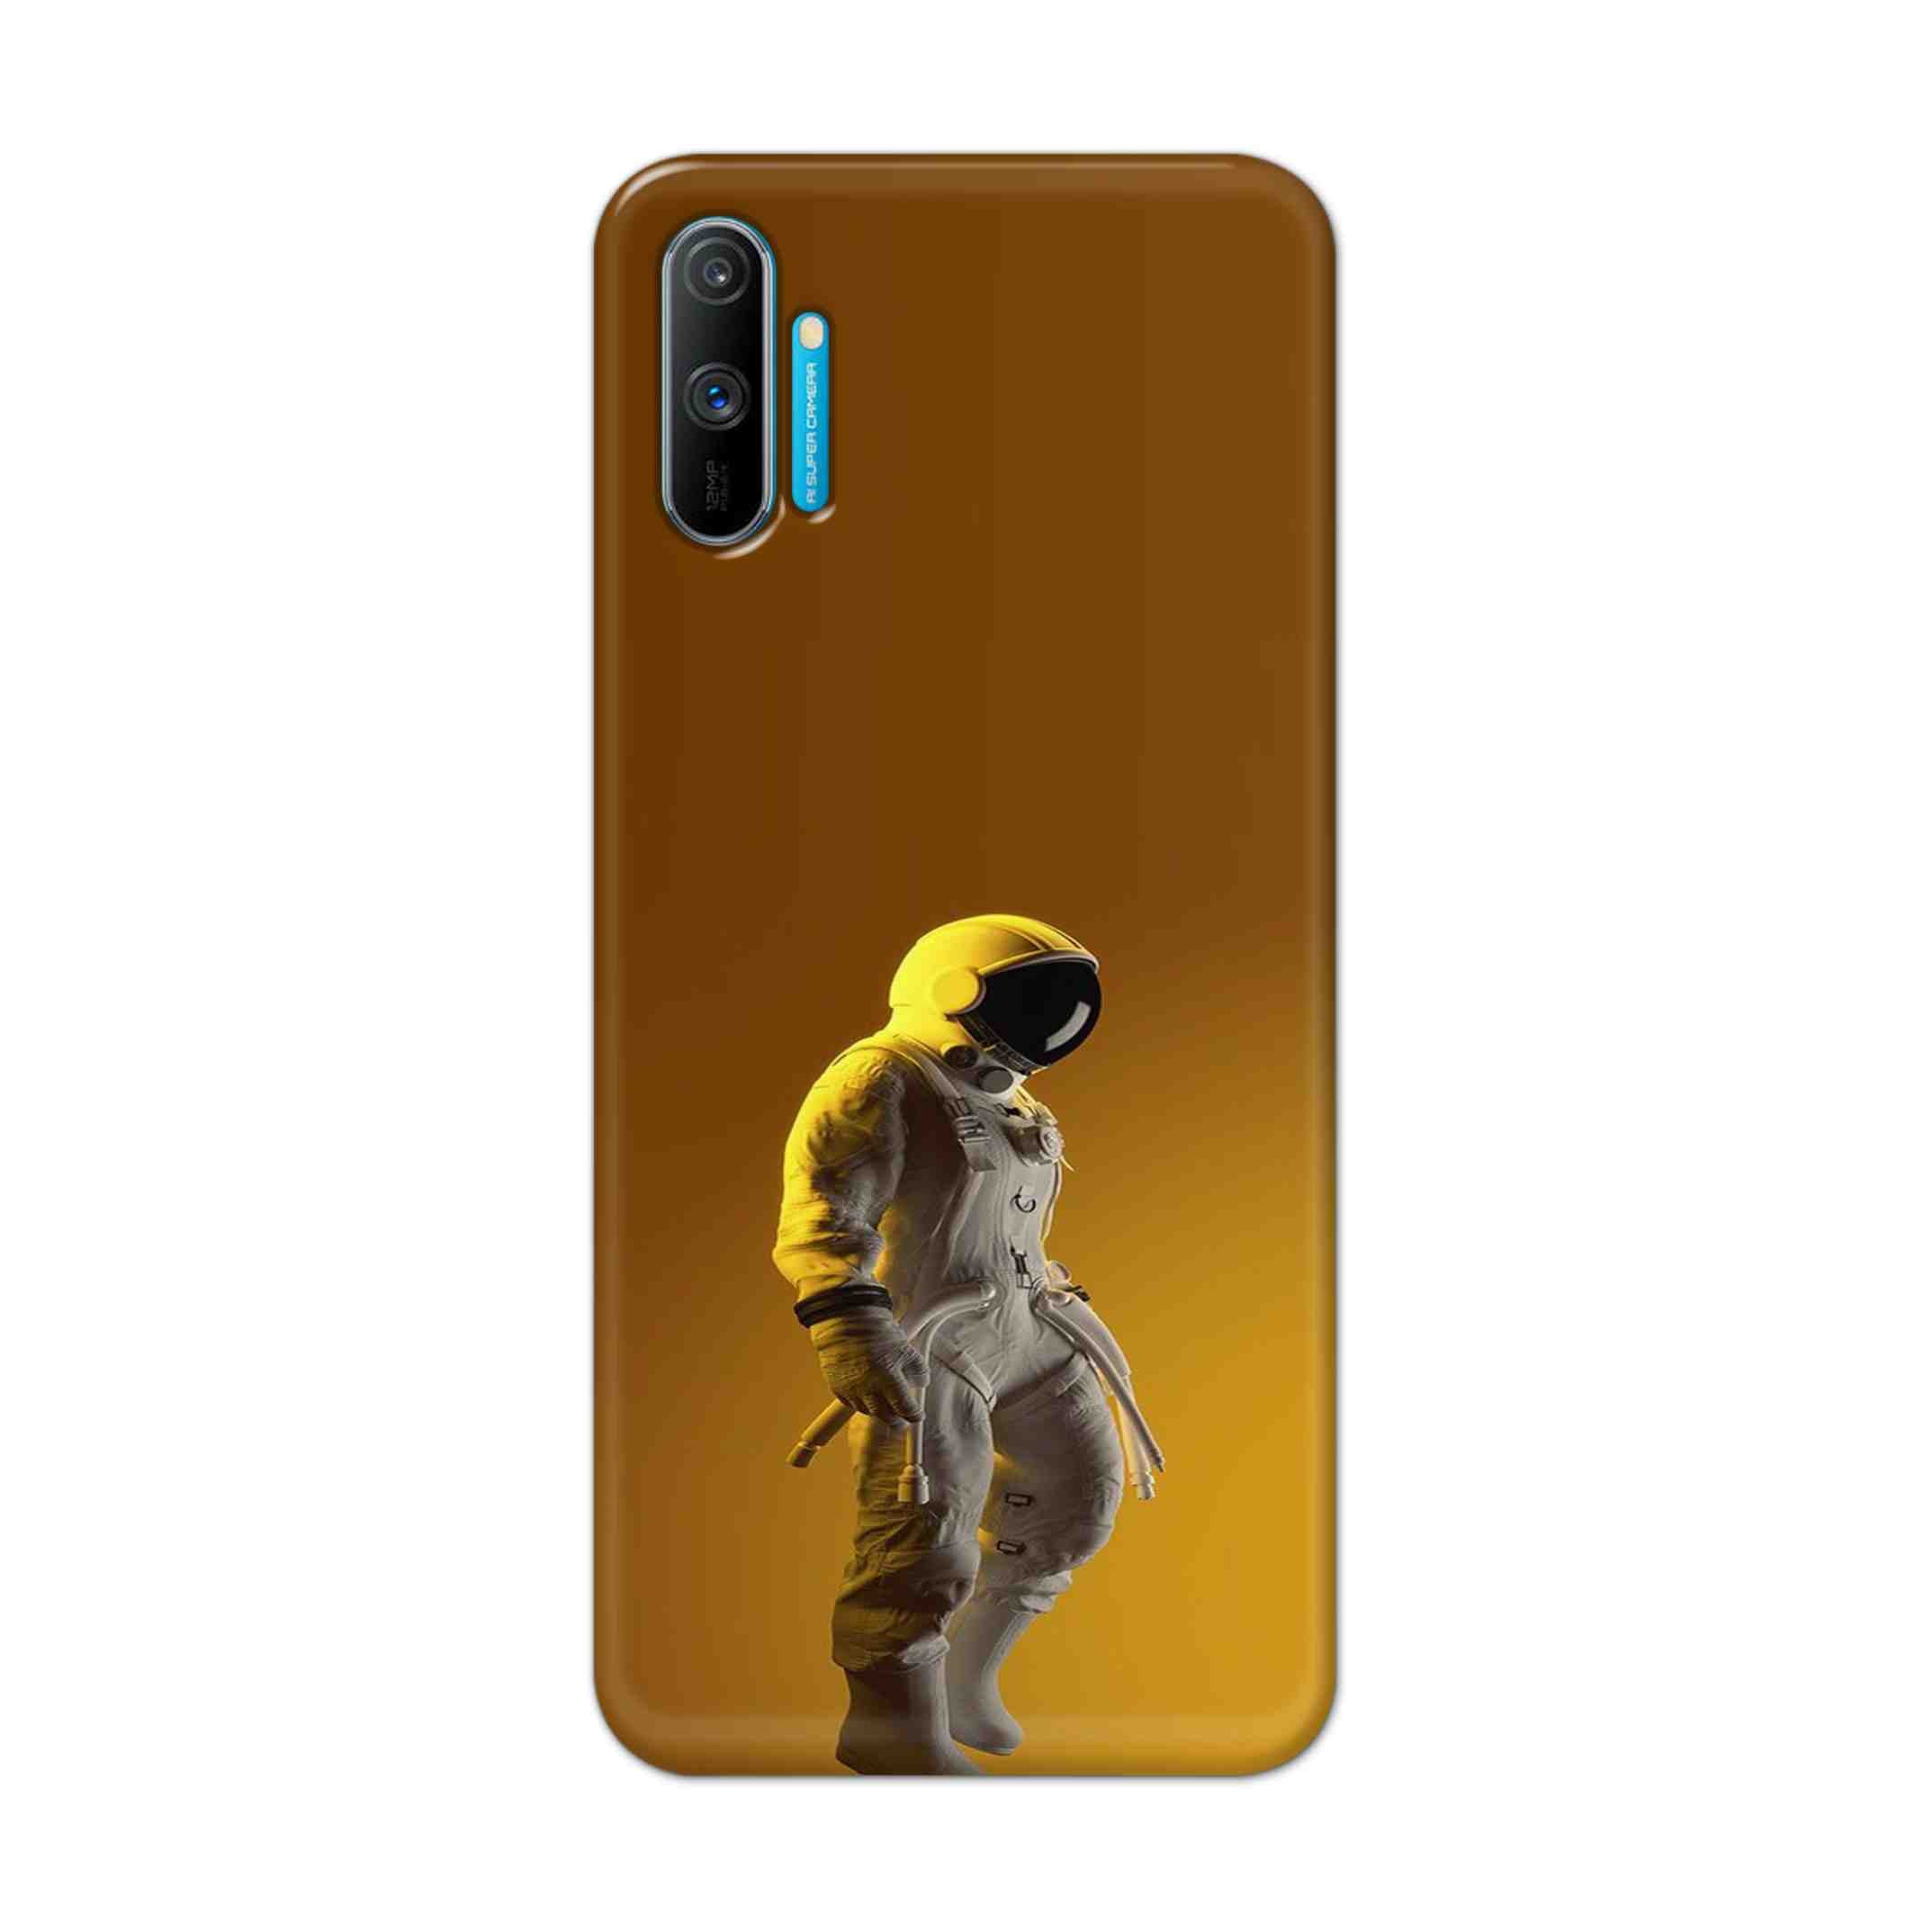 Buy Yellow Astronaut Hard Back Mobile Phone Case Cover For Realme C3 Online